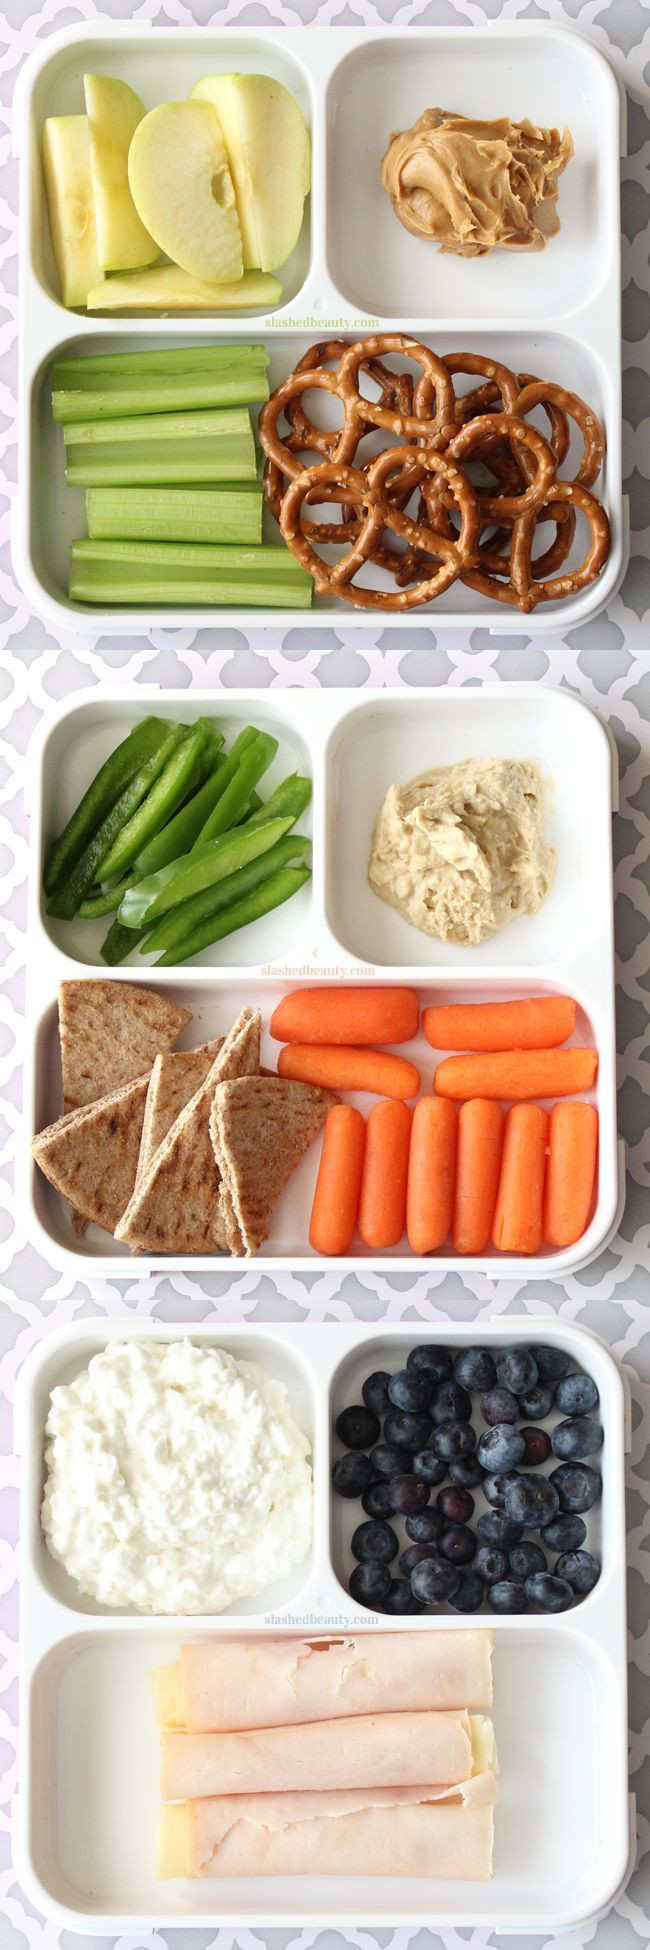 Pinterest Healthy Snacks
 549 best images about Healthy Snacks For Kids on Pinterest